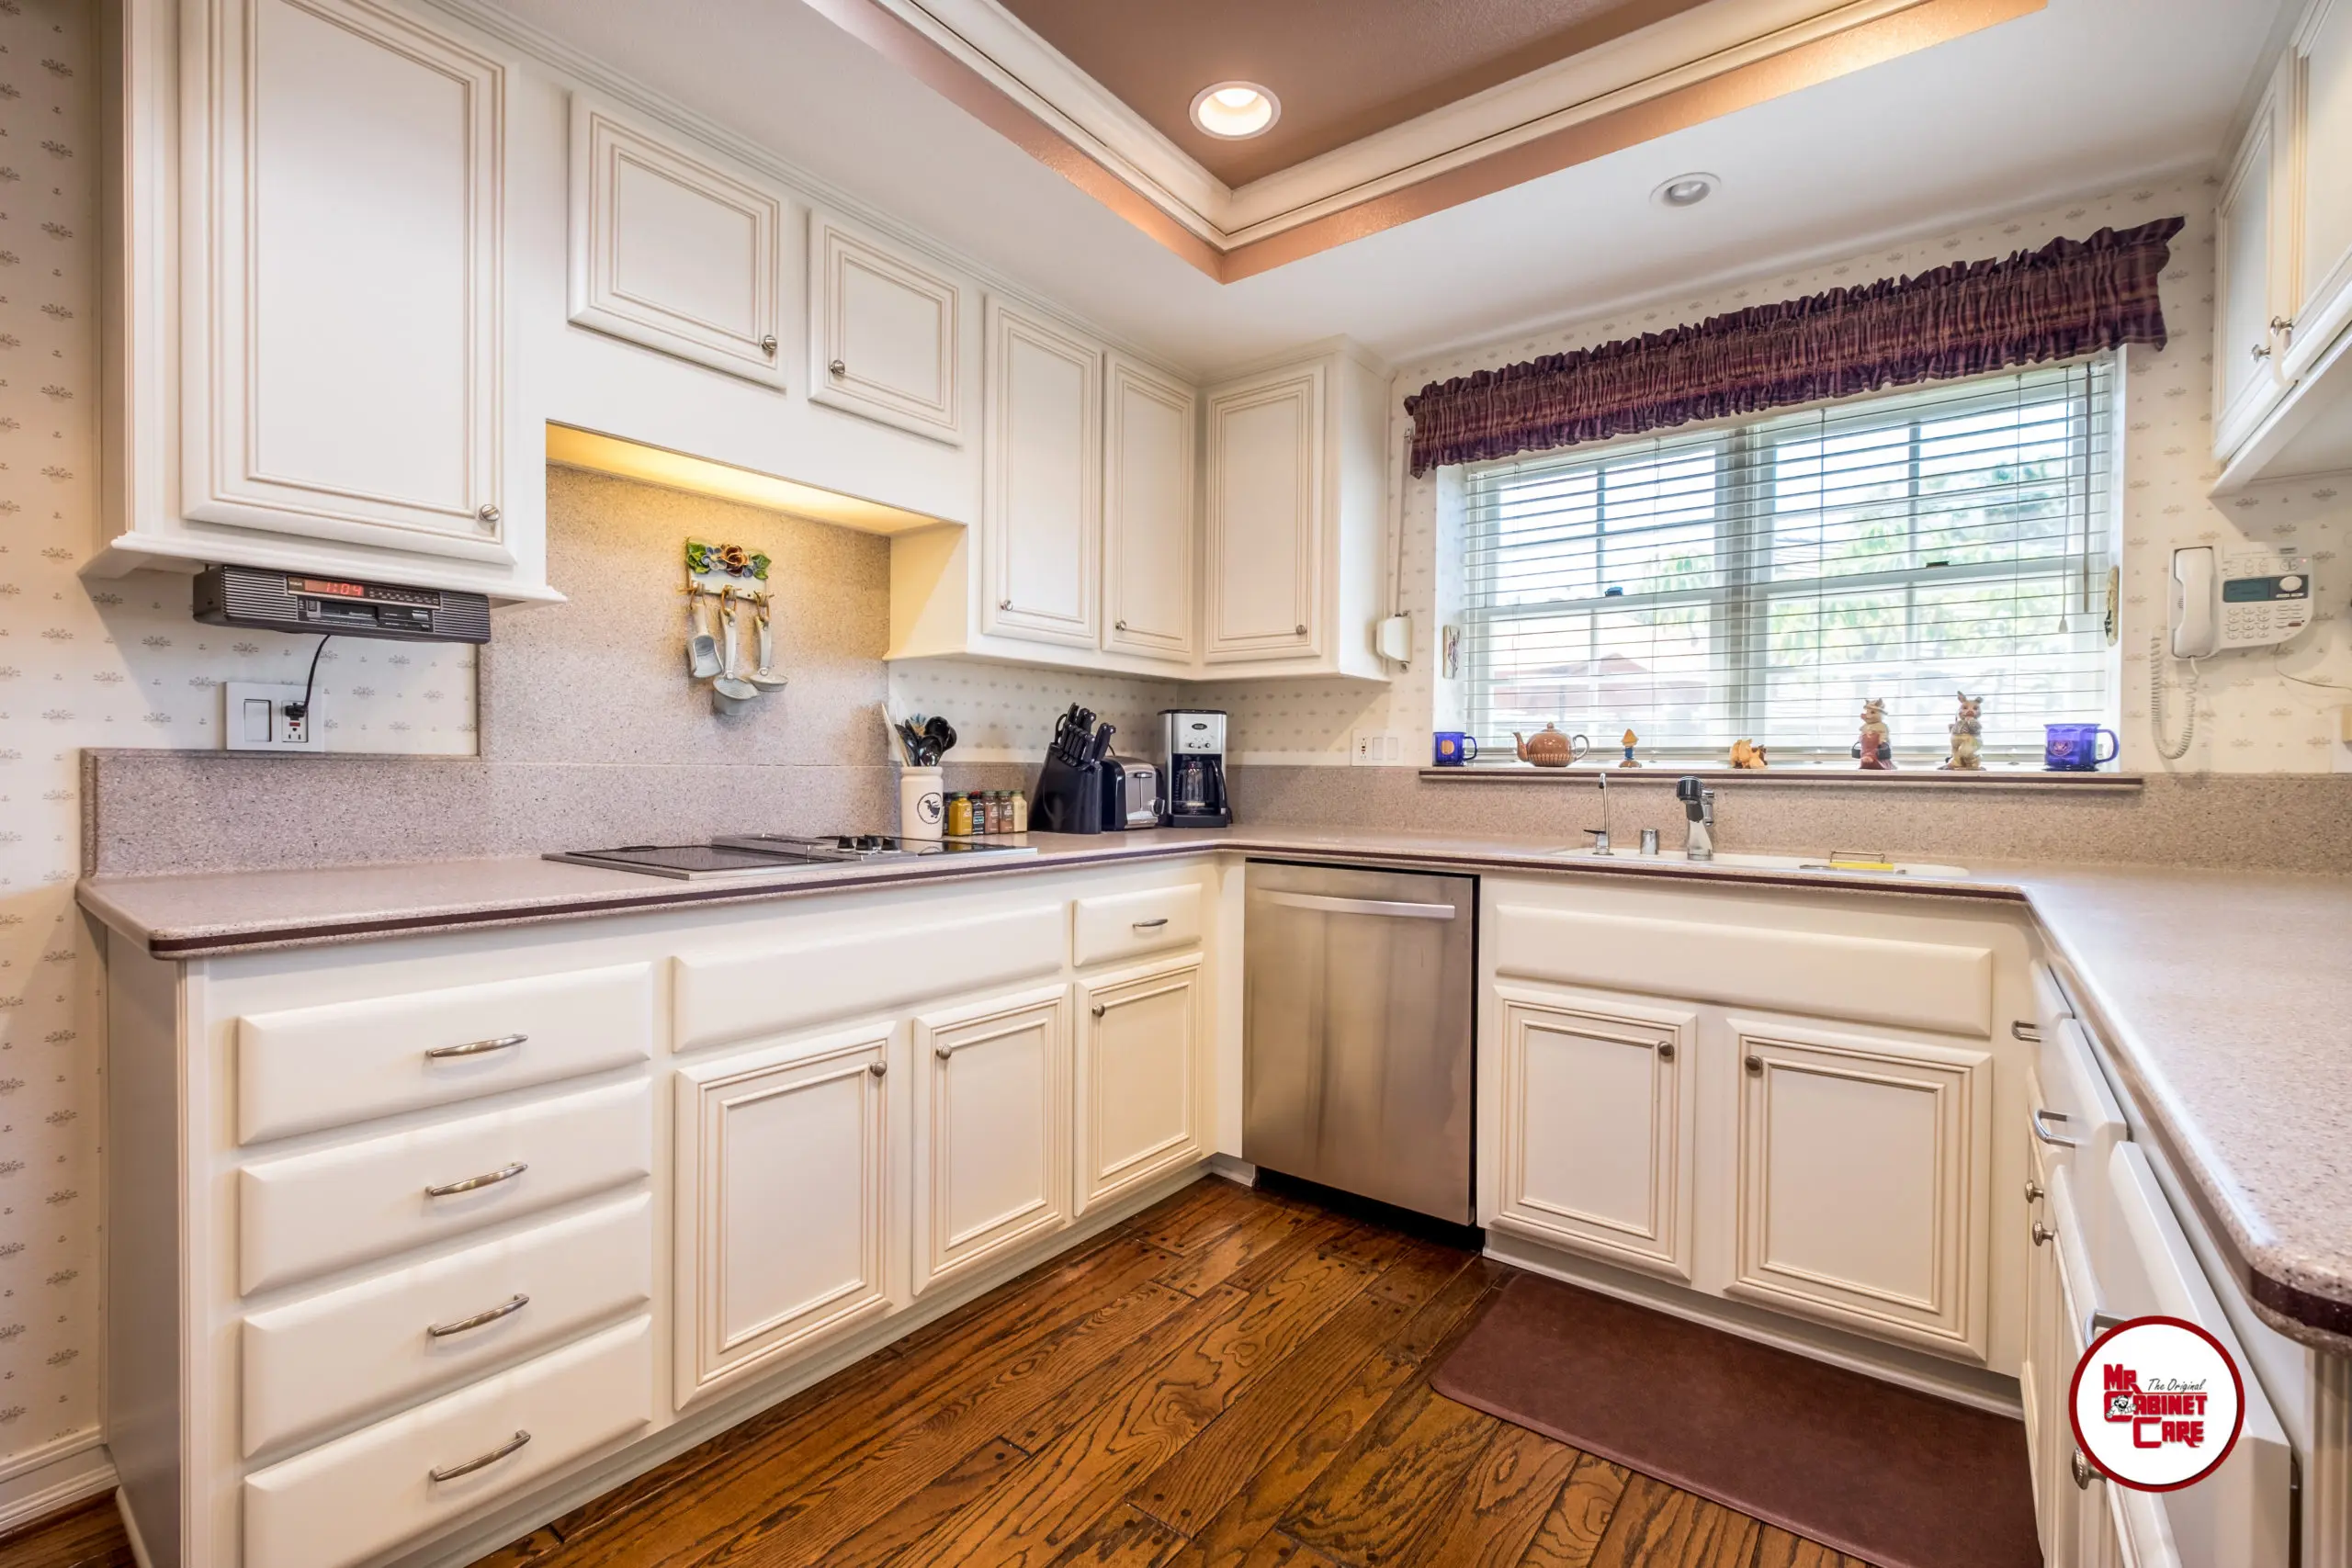 Breaking Down The Costs Of Cabinet Refacing, Is It Expensive To Replace Kitchen Cabinets